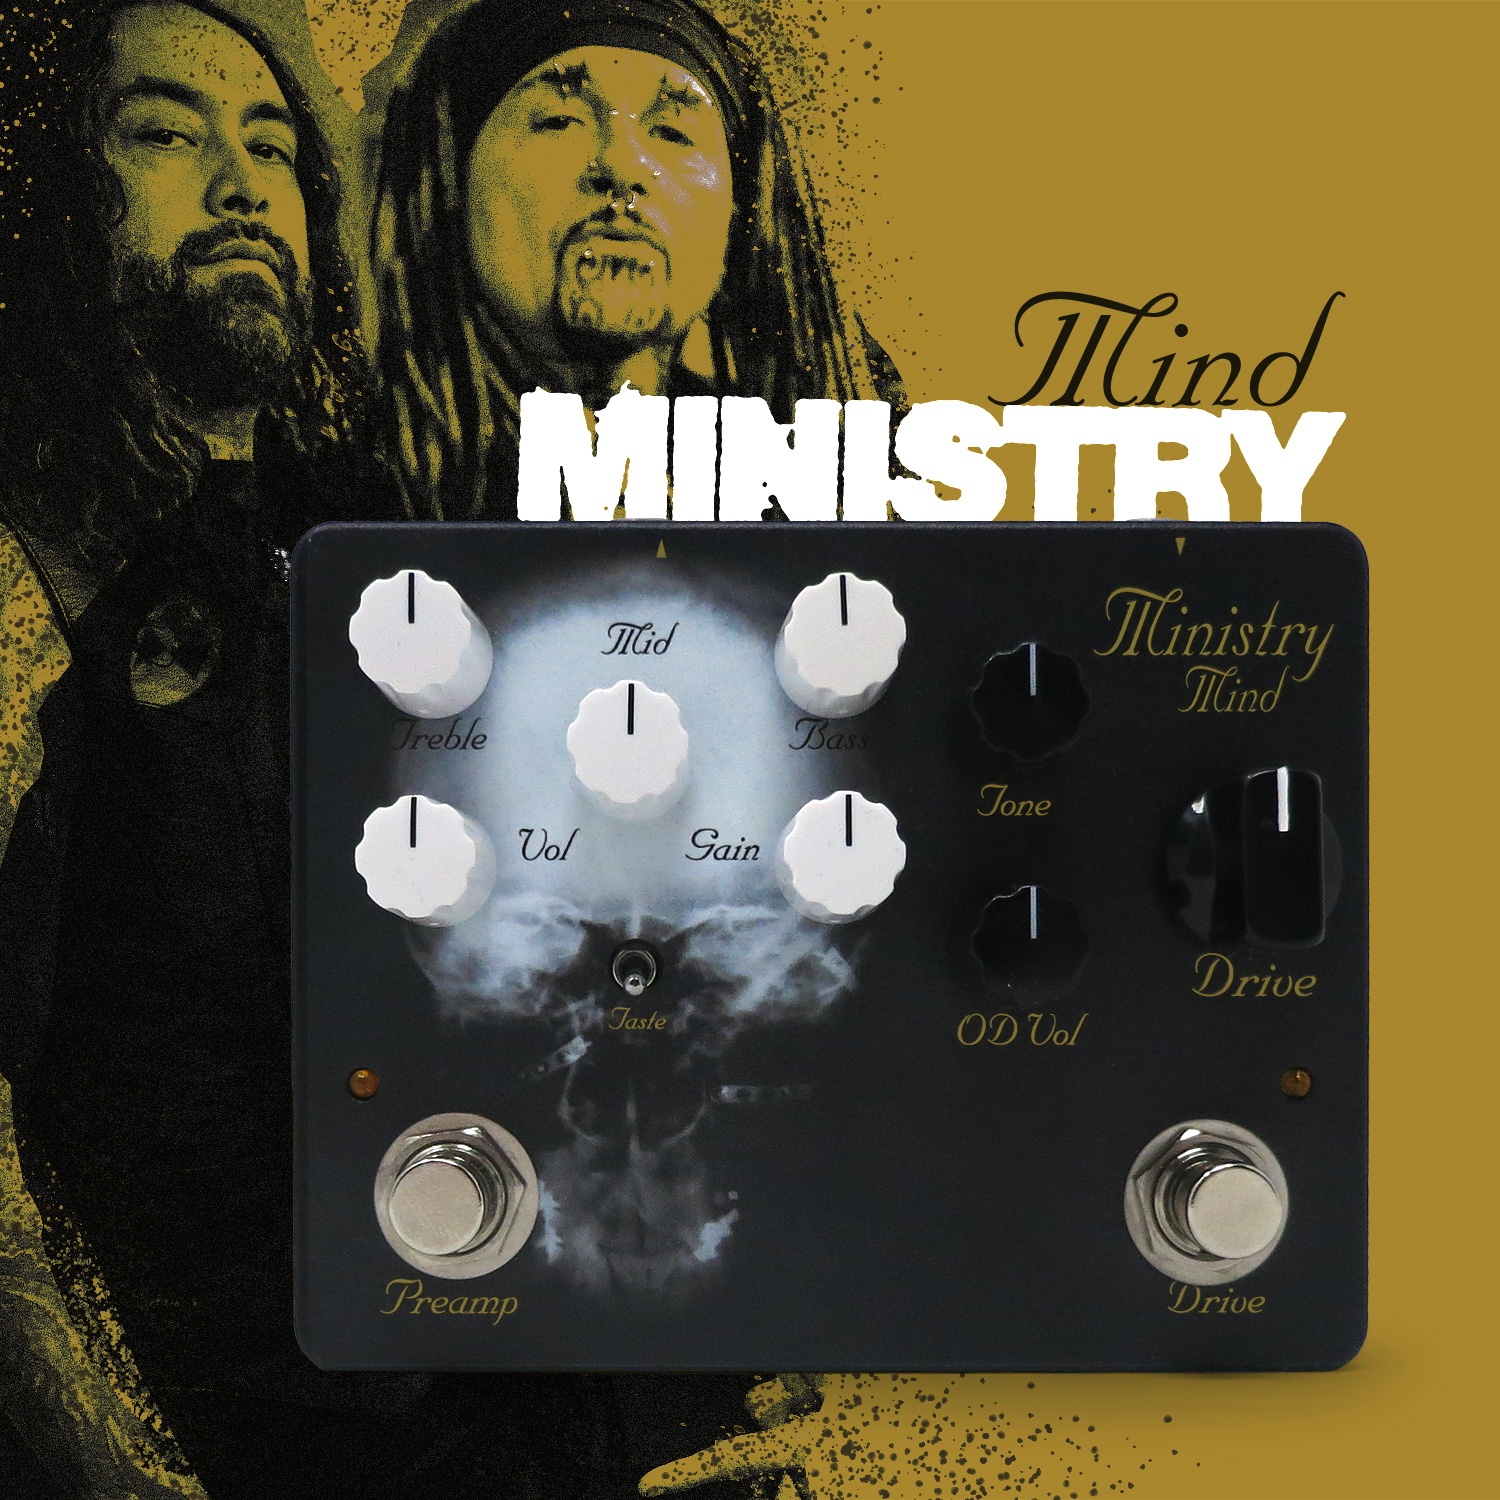 Ministry Releases Custom-Built "The Mind is a Terrible Thing to Taste" Guitar Pedal